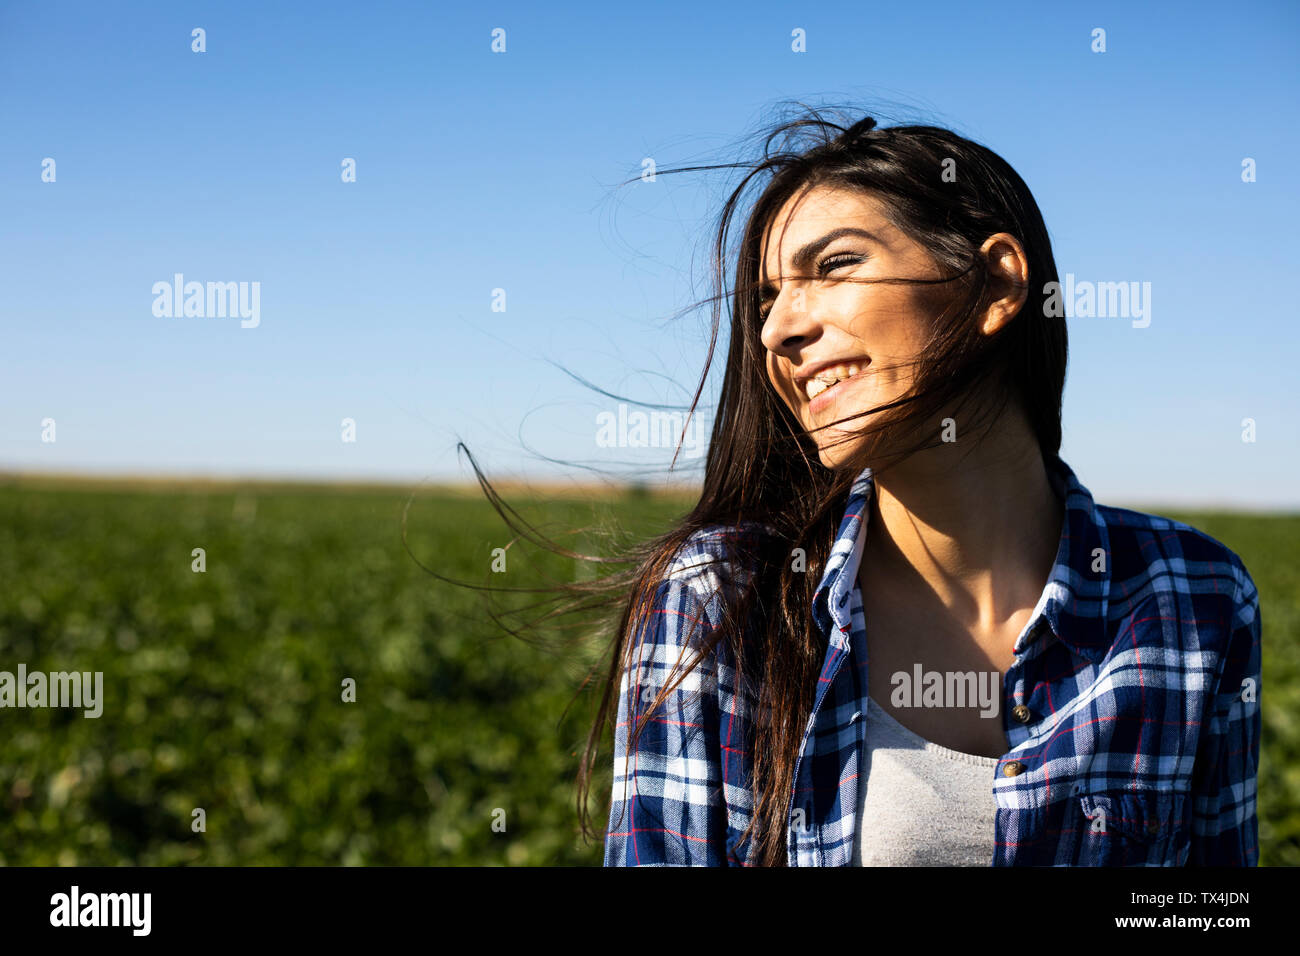 Young woman farmer with hoe on field Stock Photo